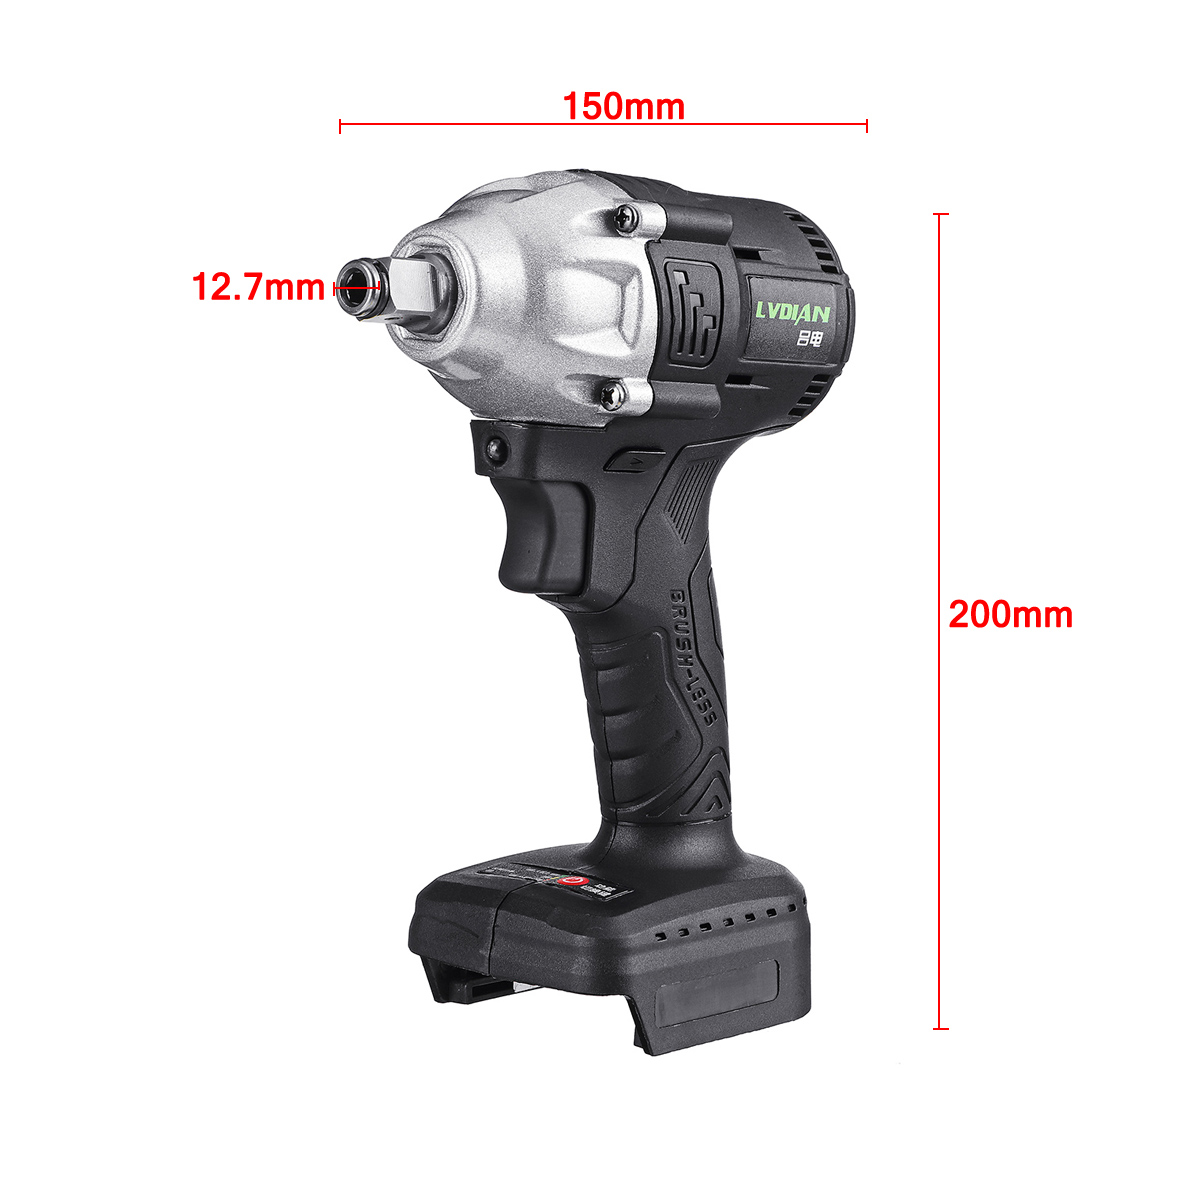 Cordless-Brushless-Electric-Impact-Wrench-For-18V-Makita-Battery-1685910-5